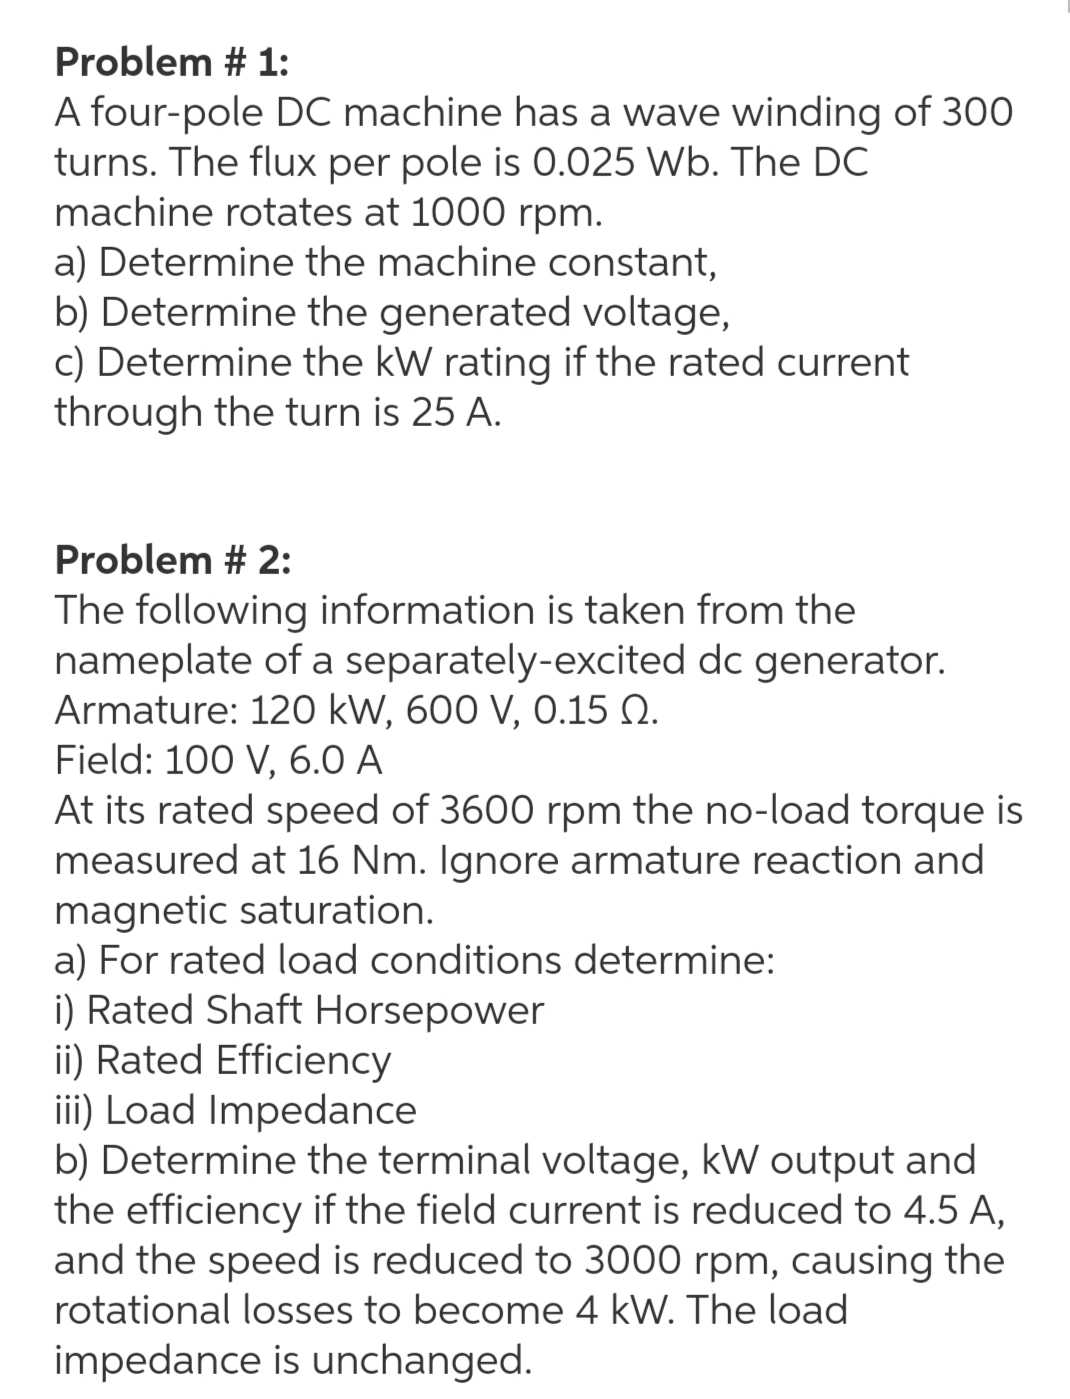 Problem # 1:
A four-pole DC machine has a wave winding of 300
turns. The flux per pole is 0.025 Wb. The DC
machine rotates at 1000 rpm.
a) Determine the machine constant,
b) Determine the generated voltage,
c) Determine the kW rating if the rated current
through the turn is 25 A.
Problem # 2:
The following information is taken from the
nameplate of a separately-excited dc generator.
Armature: 120 kW, 600 V, 0.15 Q.
Field: 100 V, 6.0 A
At its rated speed of 3600 rpm the no-load torque is
measured at 16 Nm. Ignore armature reaction and
magnetic saturation.
a) For rated load conditions determine:
i) Rated Shaft Horsepower
ii) Rated Efficiency
iii) Load Impedance
b) Determine the terminal voltage, kW output and
the efficiency if the field current is reduced to 4.5 A,
and the speed is reduced to 3000 rpm, causing the
rotational losses to become 4 kW. The load
impedance is unchanged.
